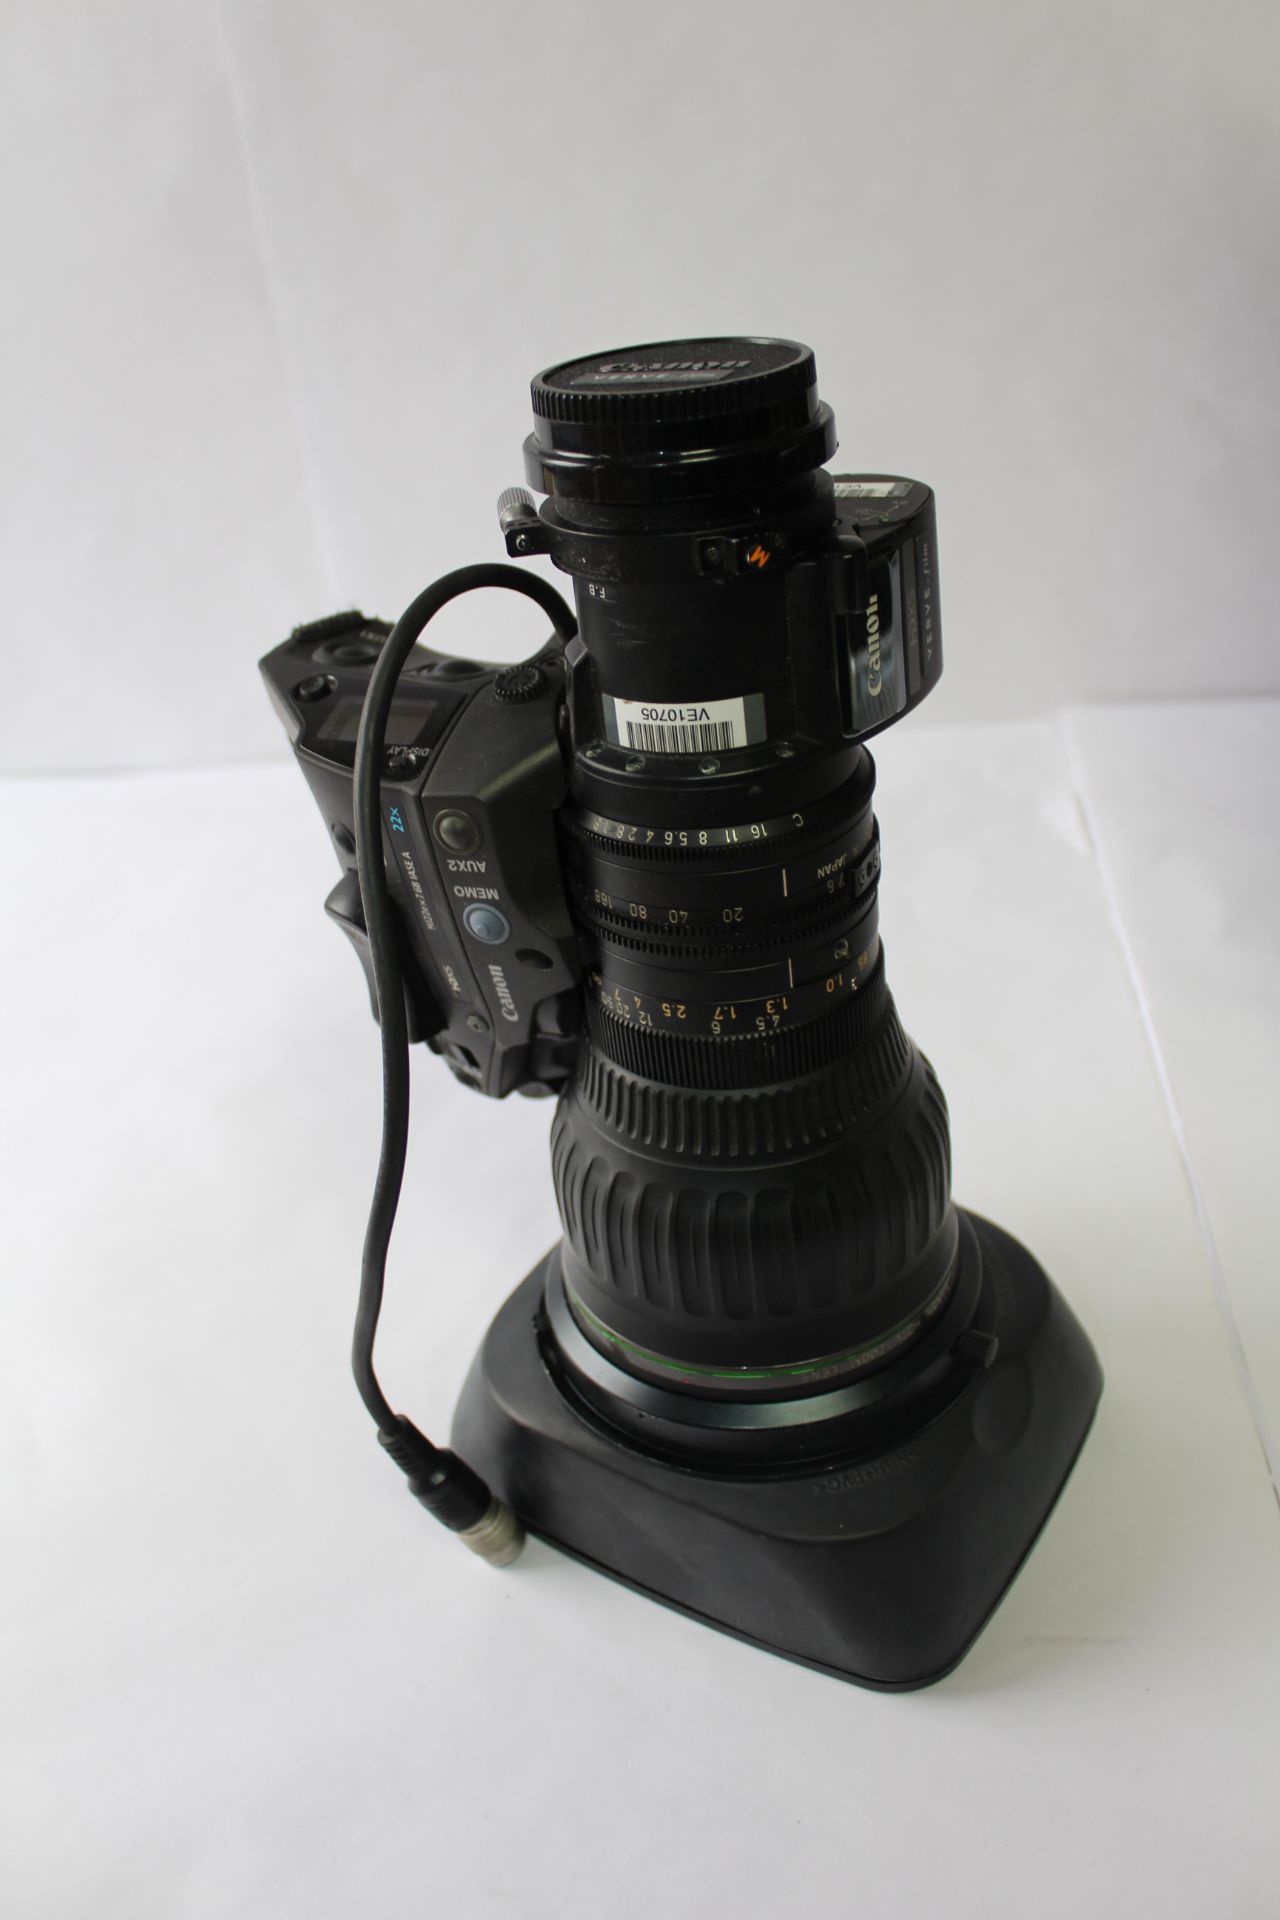 Canon HJ22EX7.6B HDTV Broadcast Zoom Lens with Flight Case - Image 2 of 2